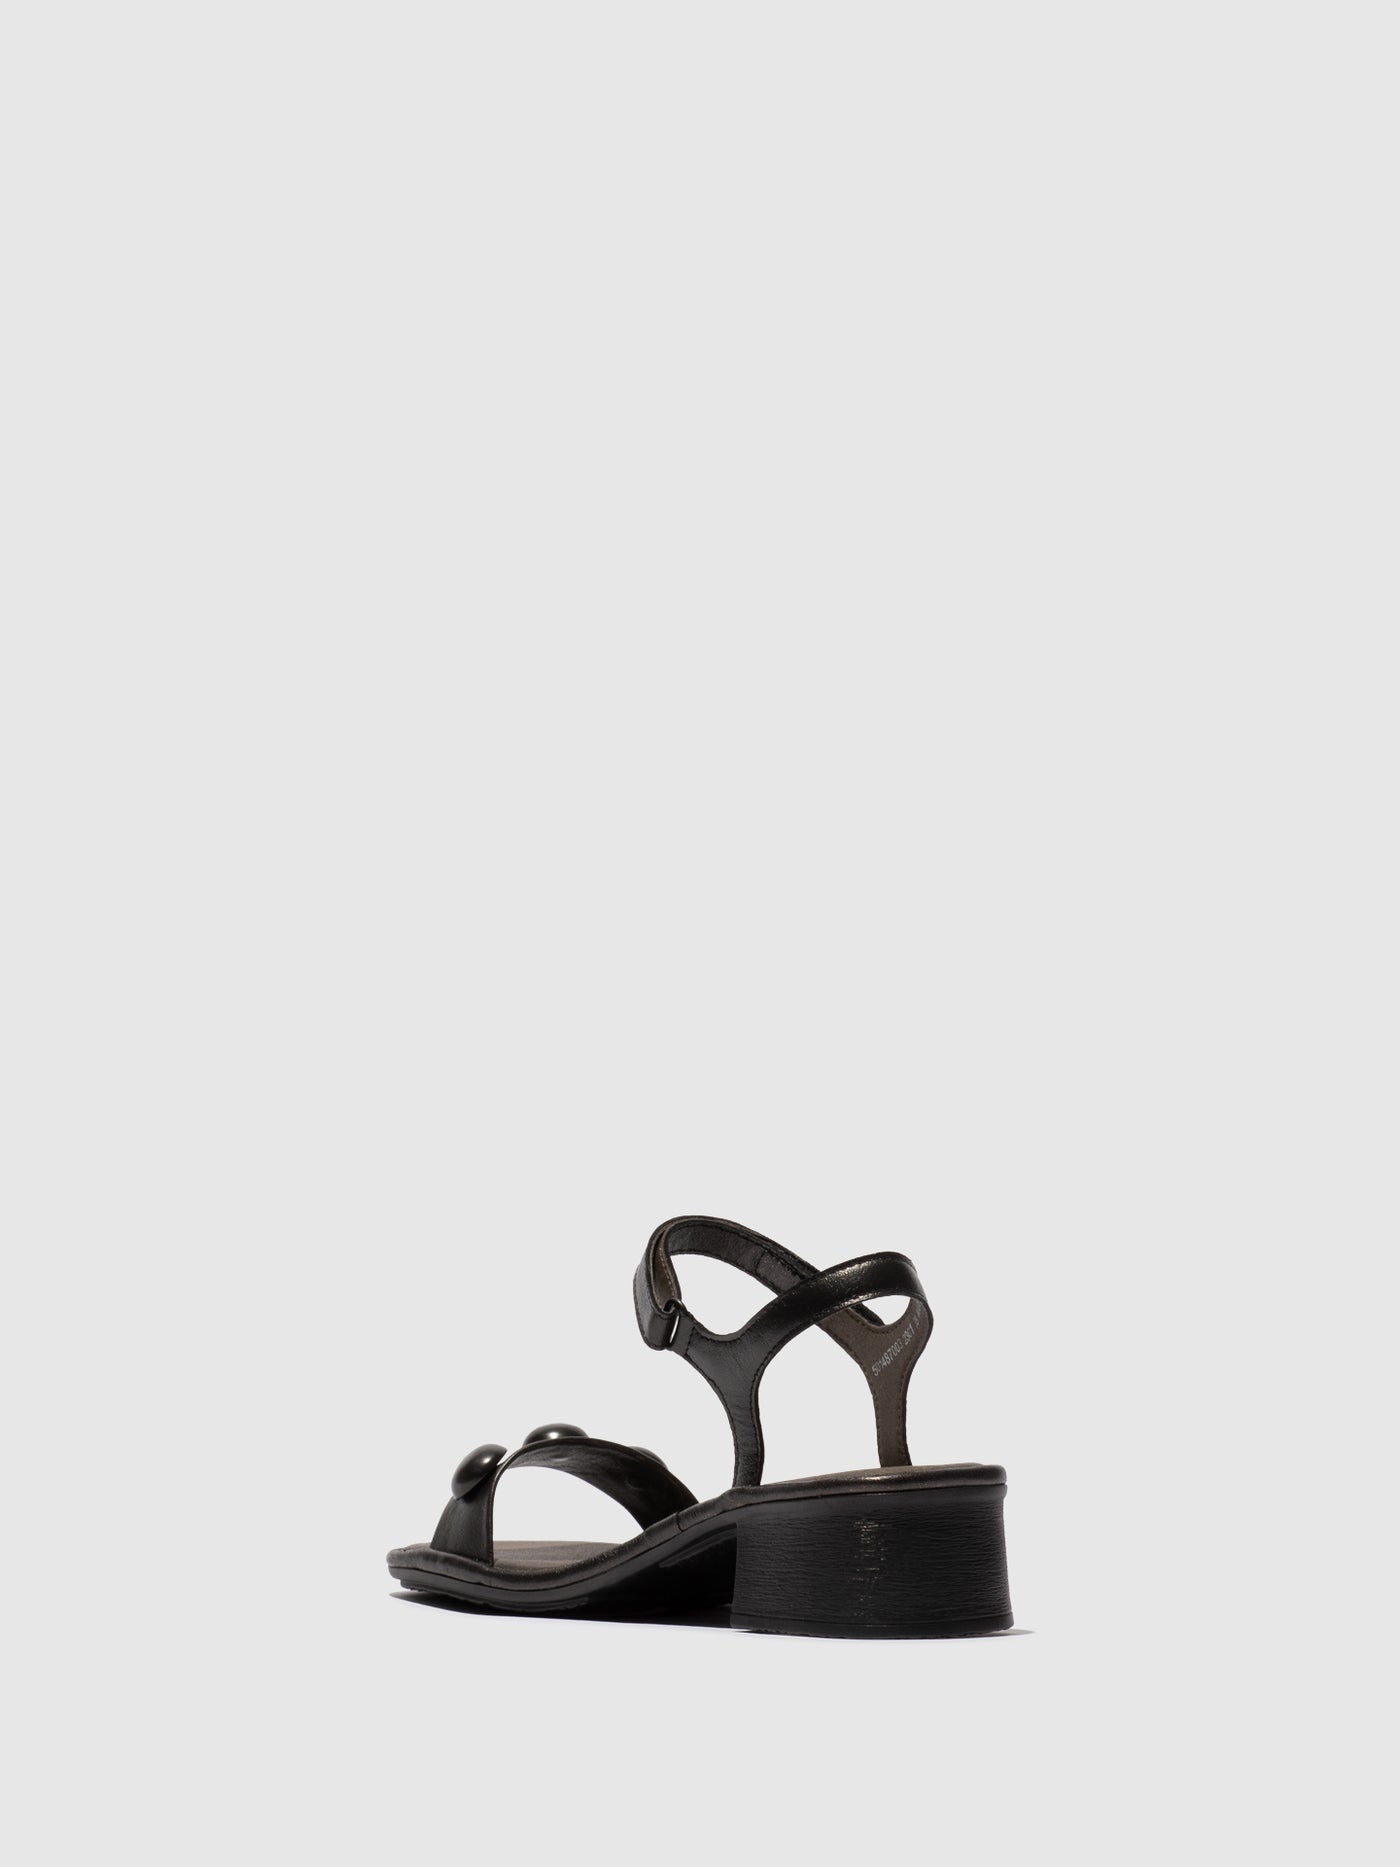 Ankle Strap Sandals EXIE487FLY BLACK